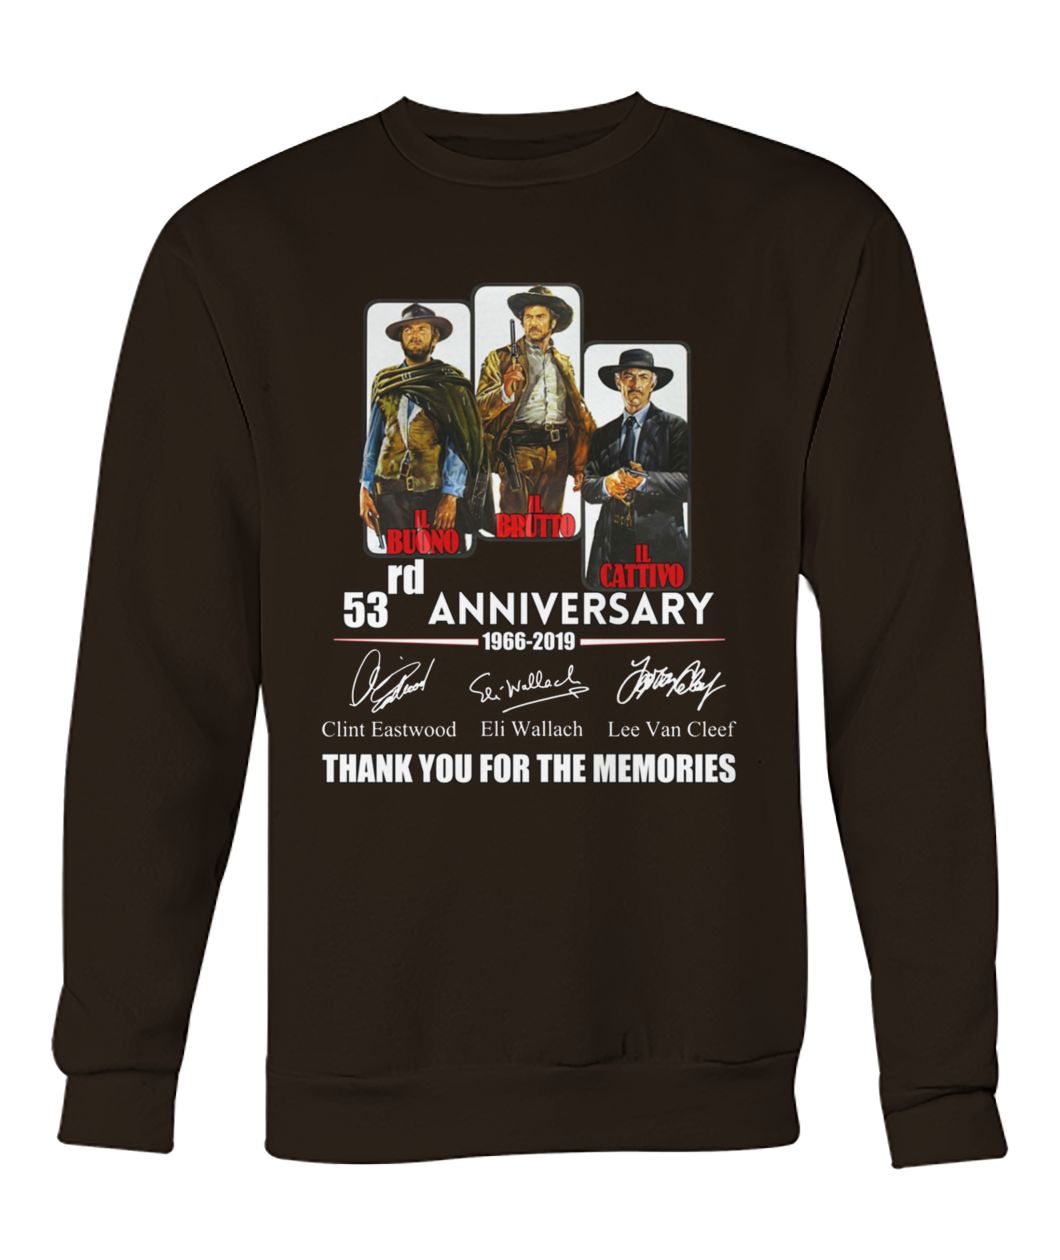 The good the bad and the ugly 53rd anniversary 1966 2019 crew neck sweatshirt